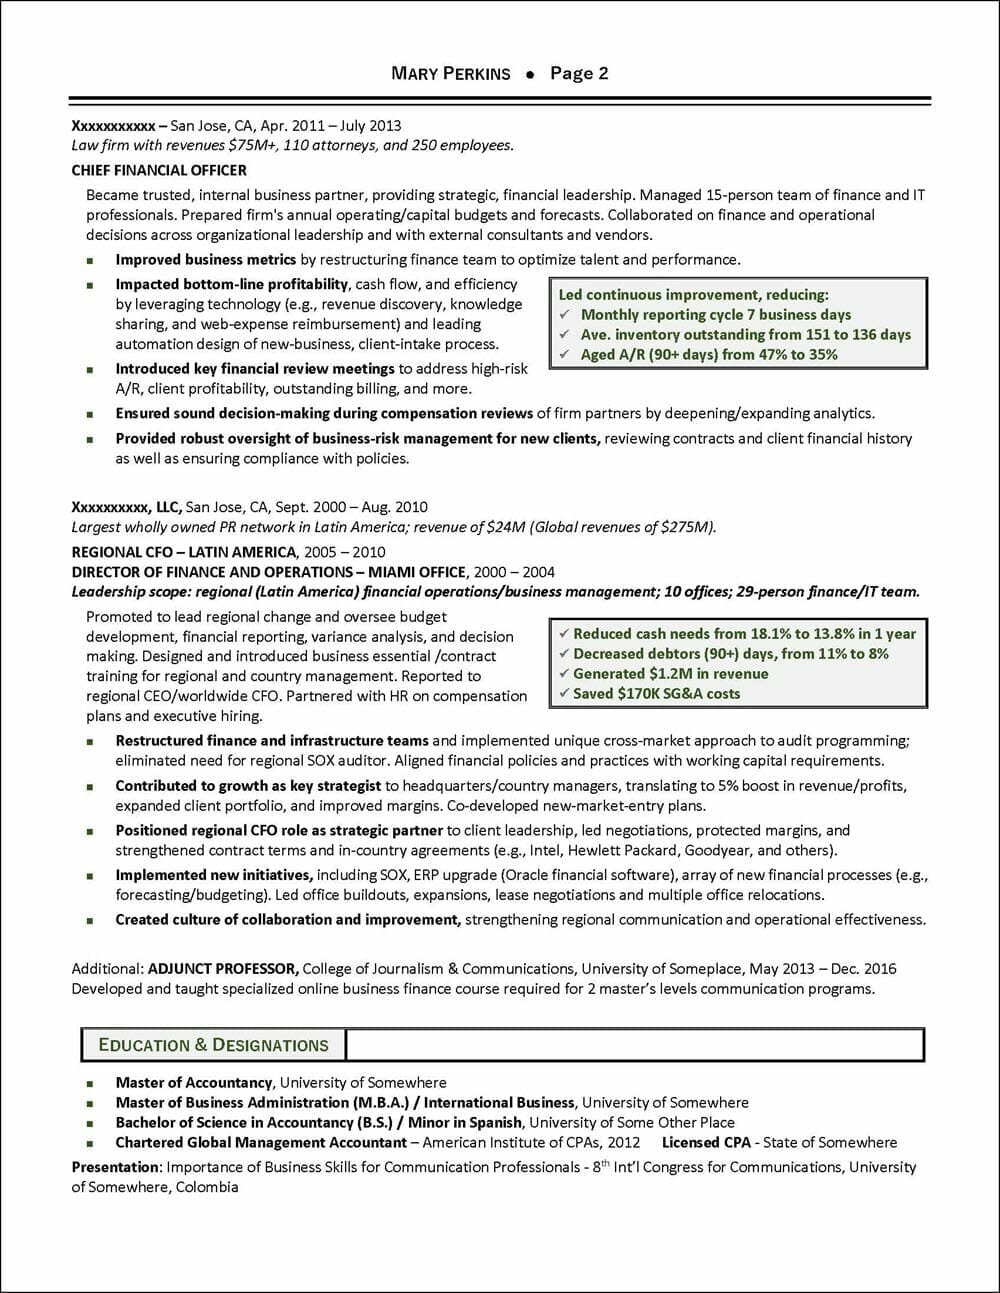 Chief Financial Officer Resume for an International Executive page 2